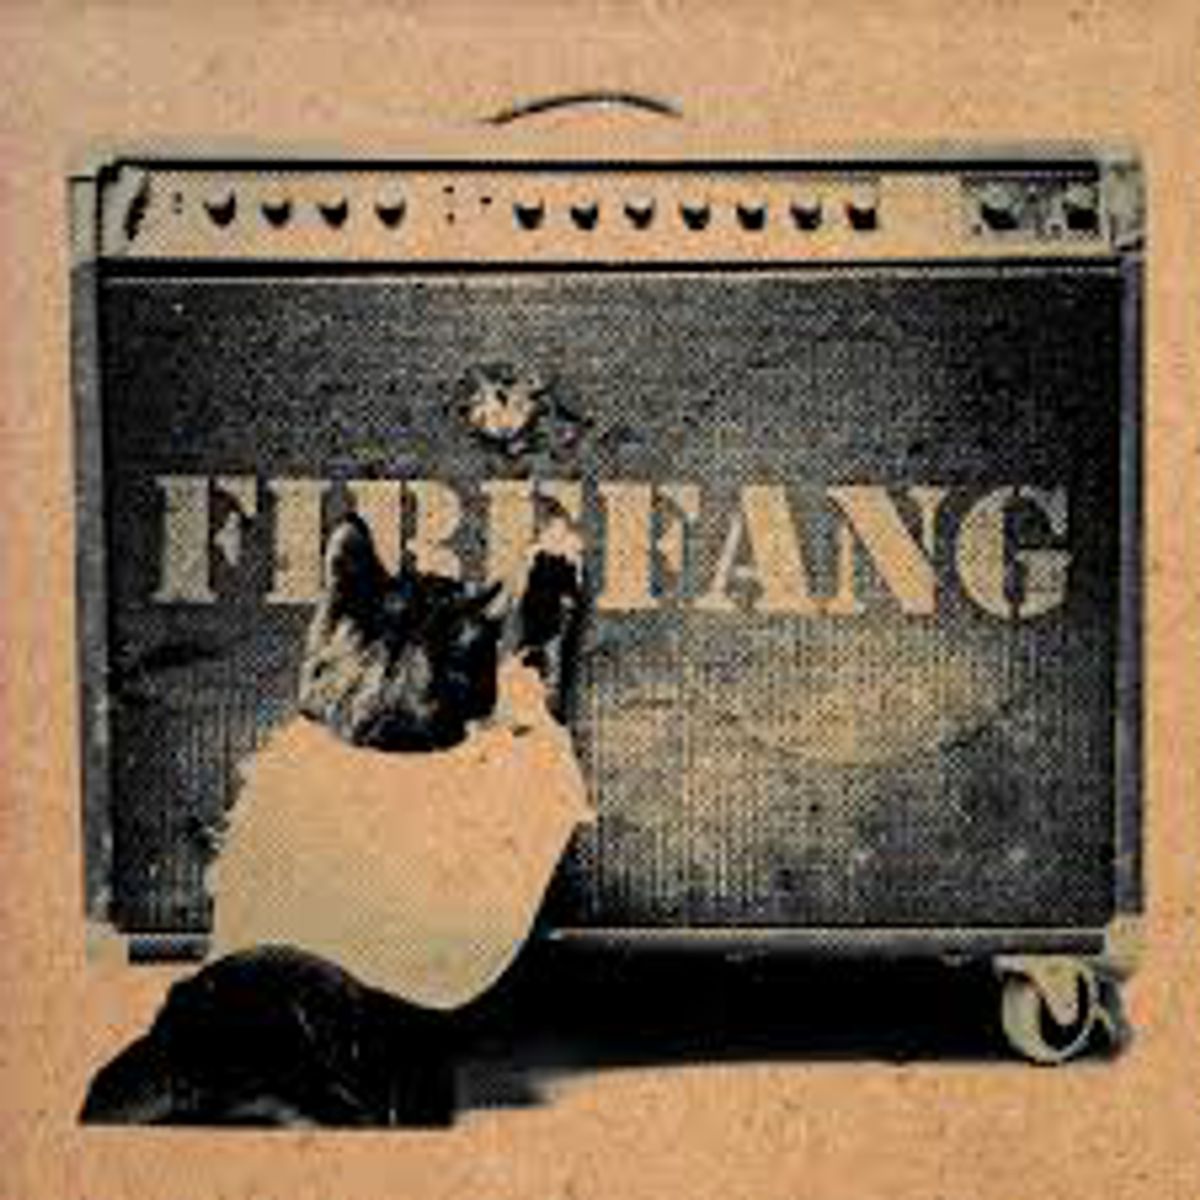 Firefang – 'Firefang' (Exit Poll)